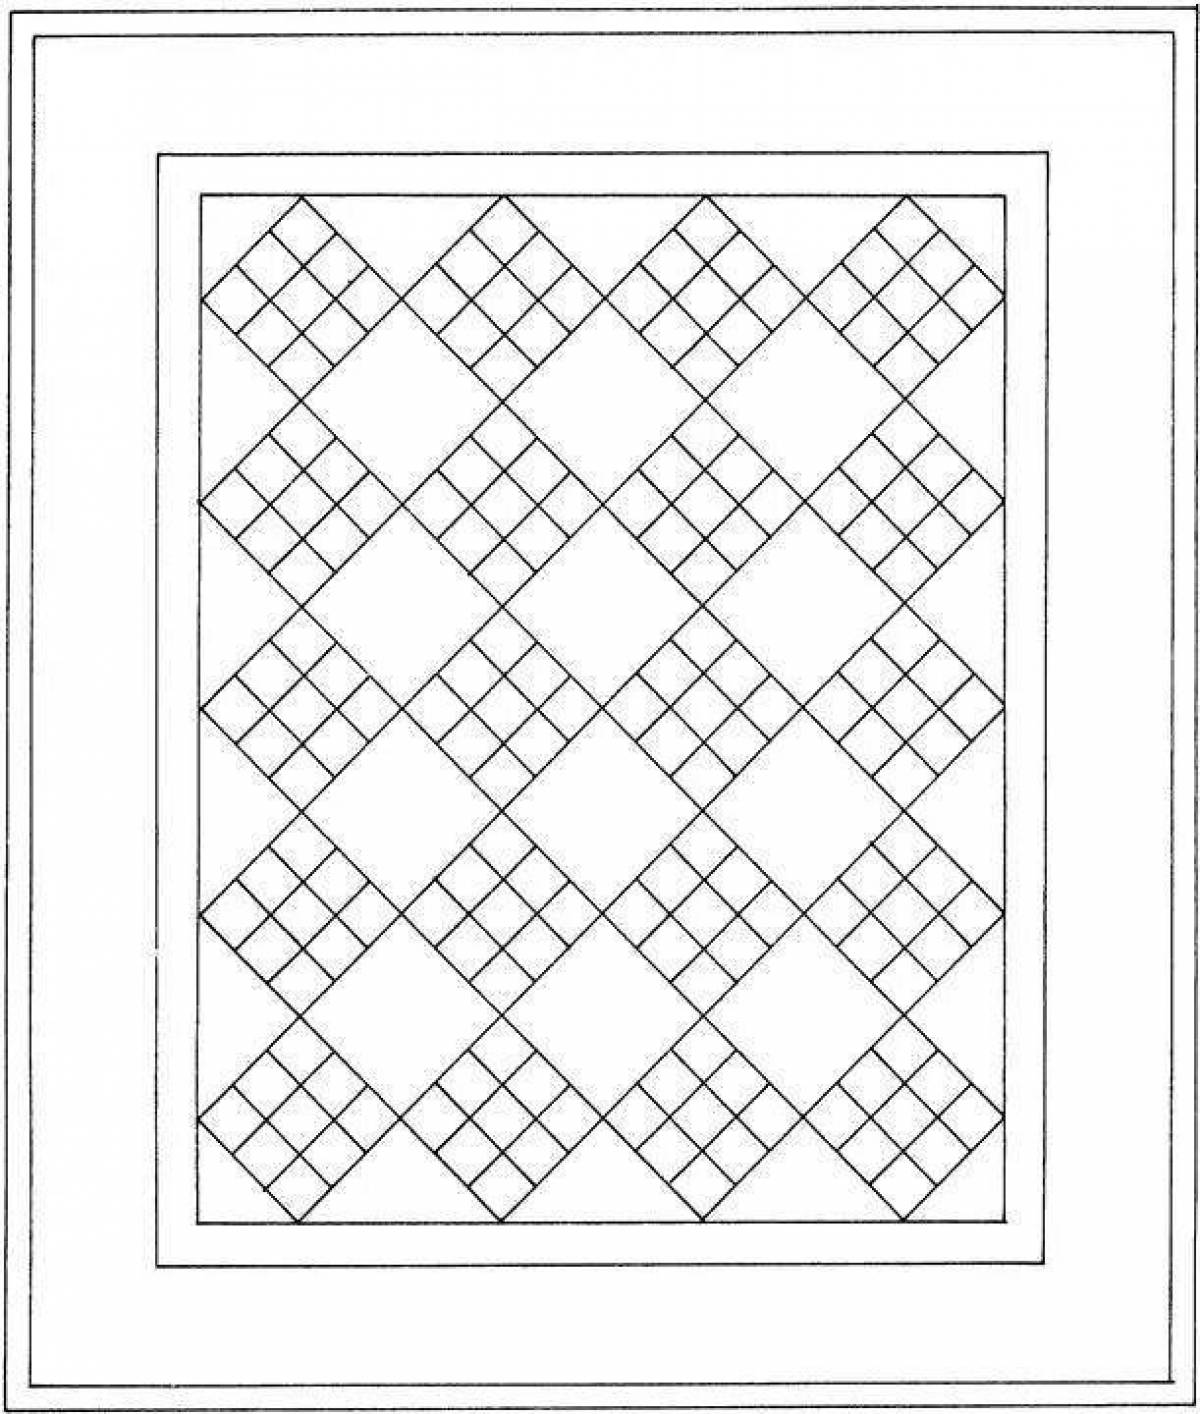 Decorated rug coloring page